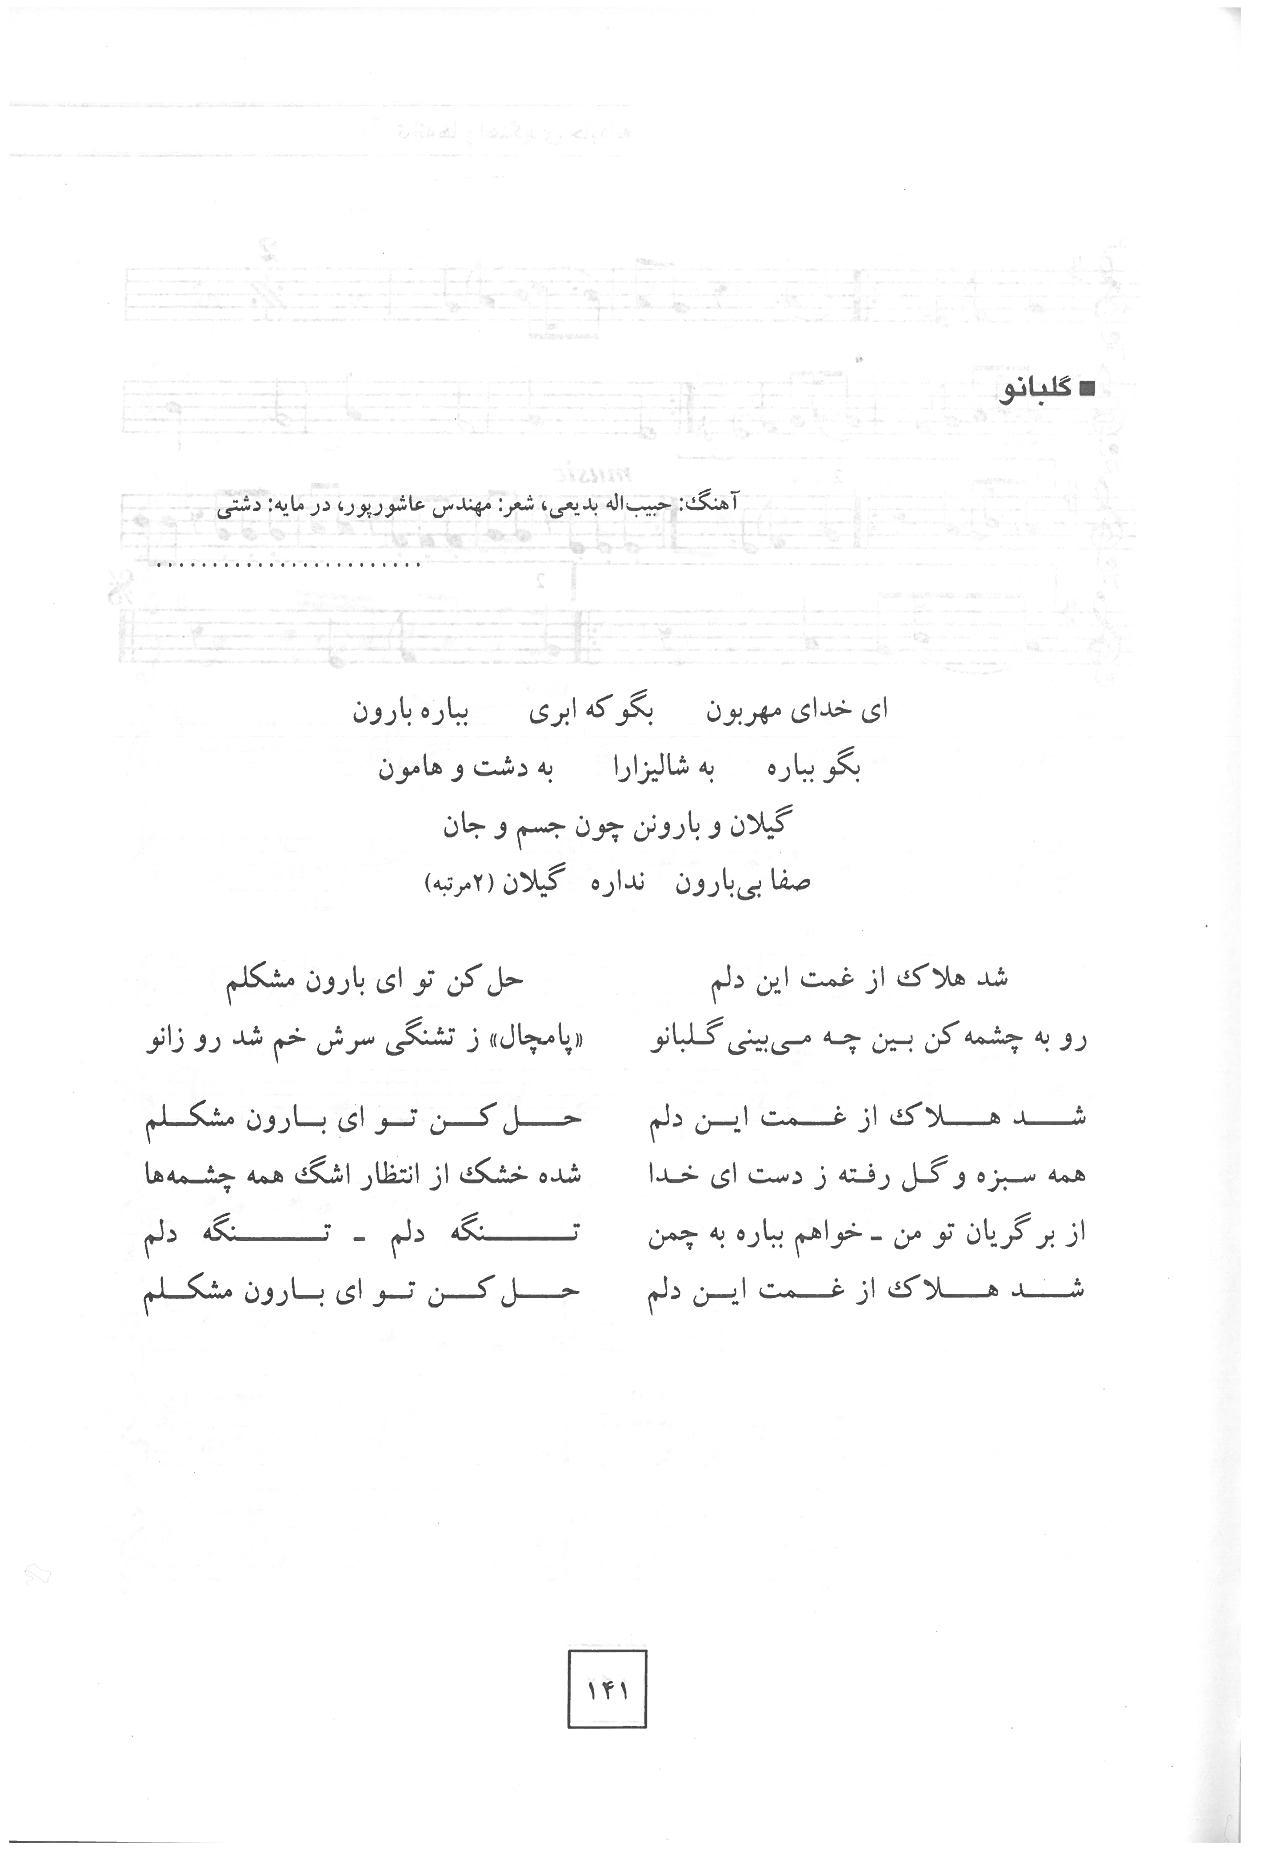 A page of an arabic language text.